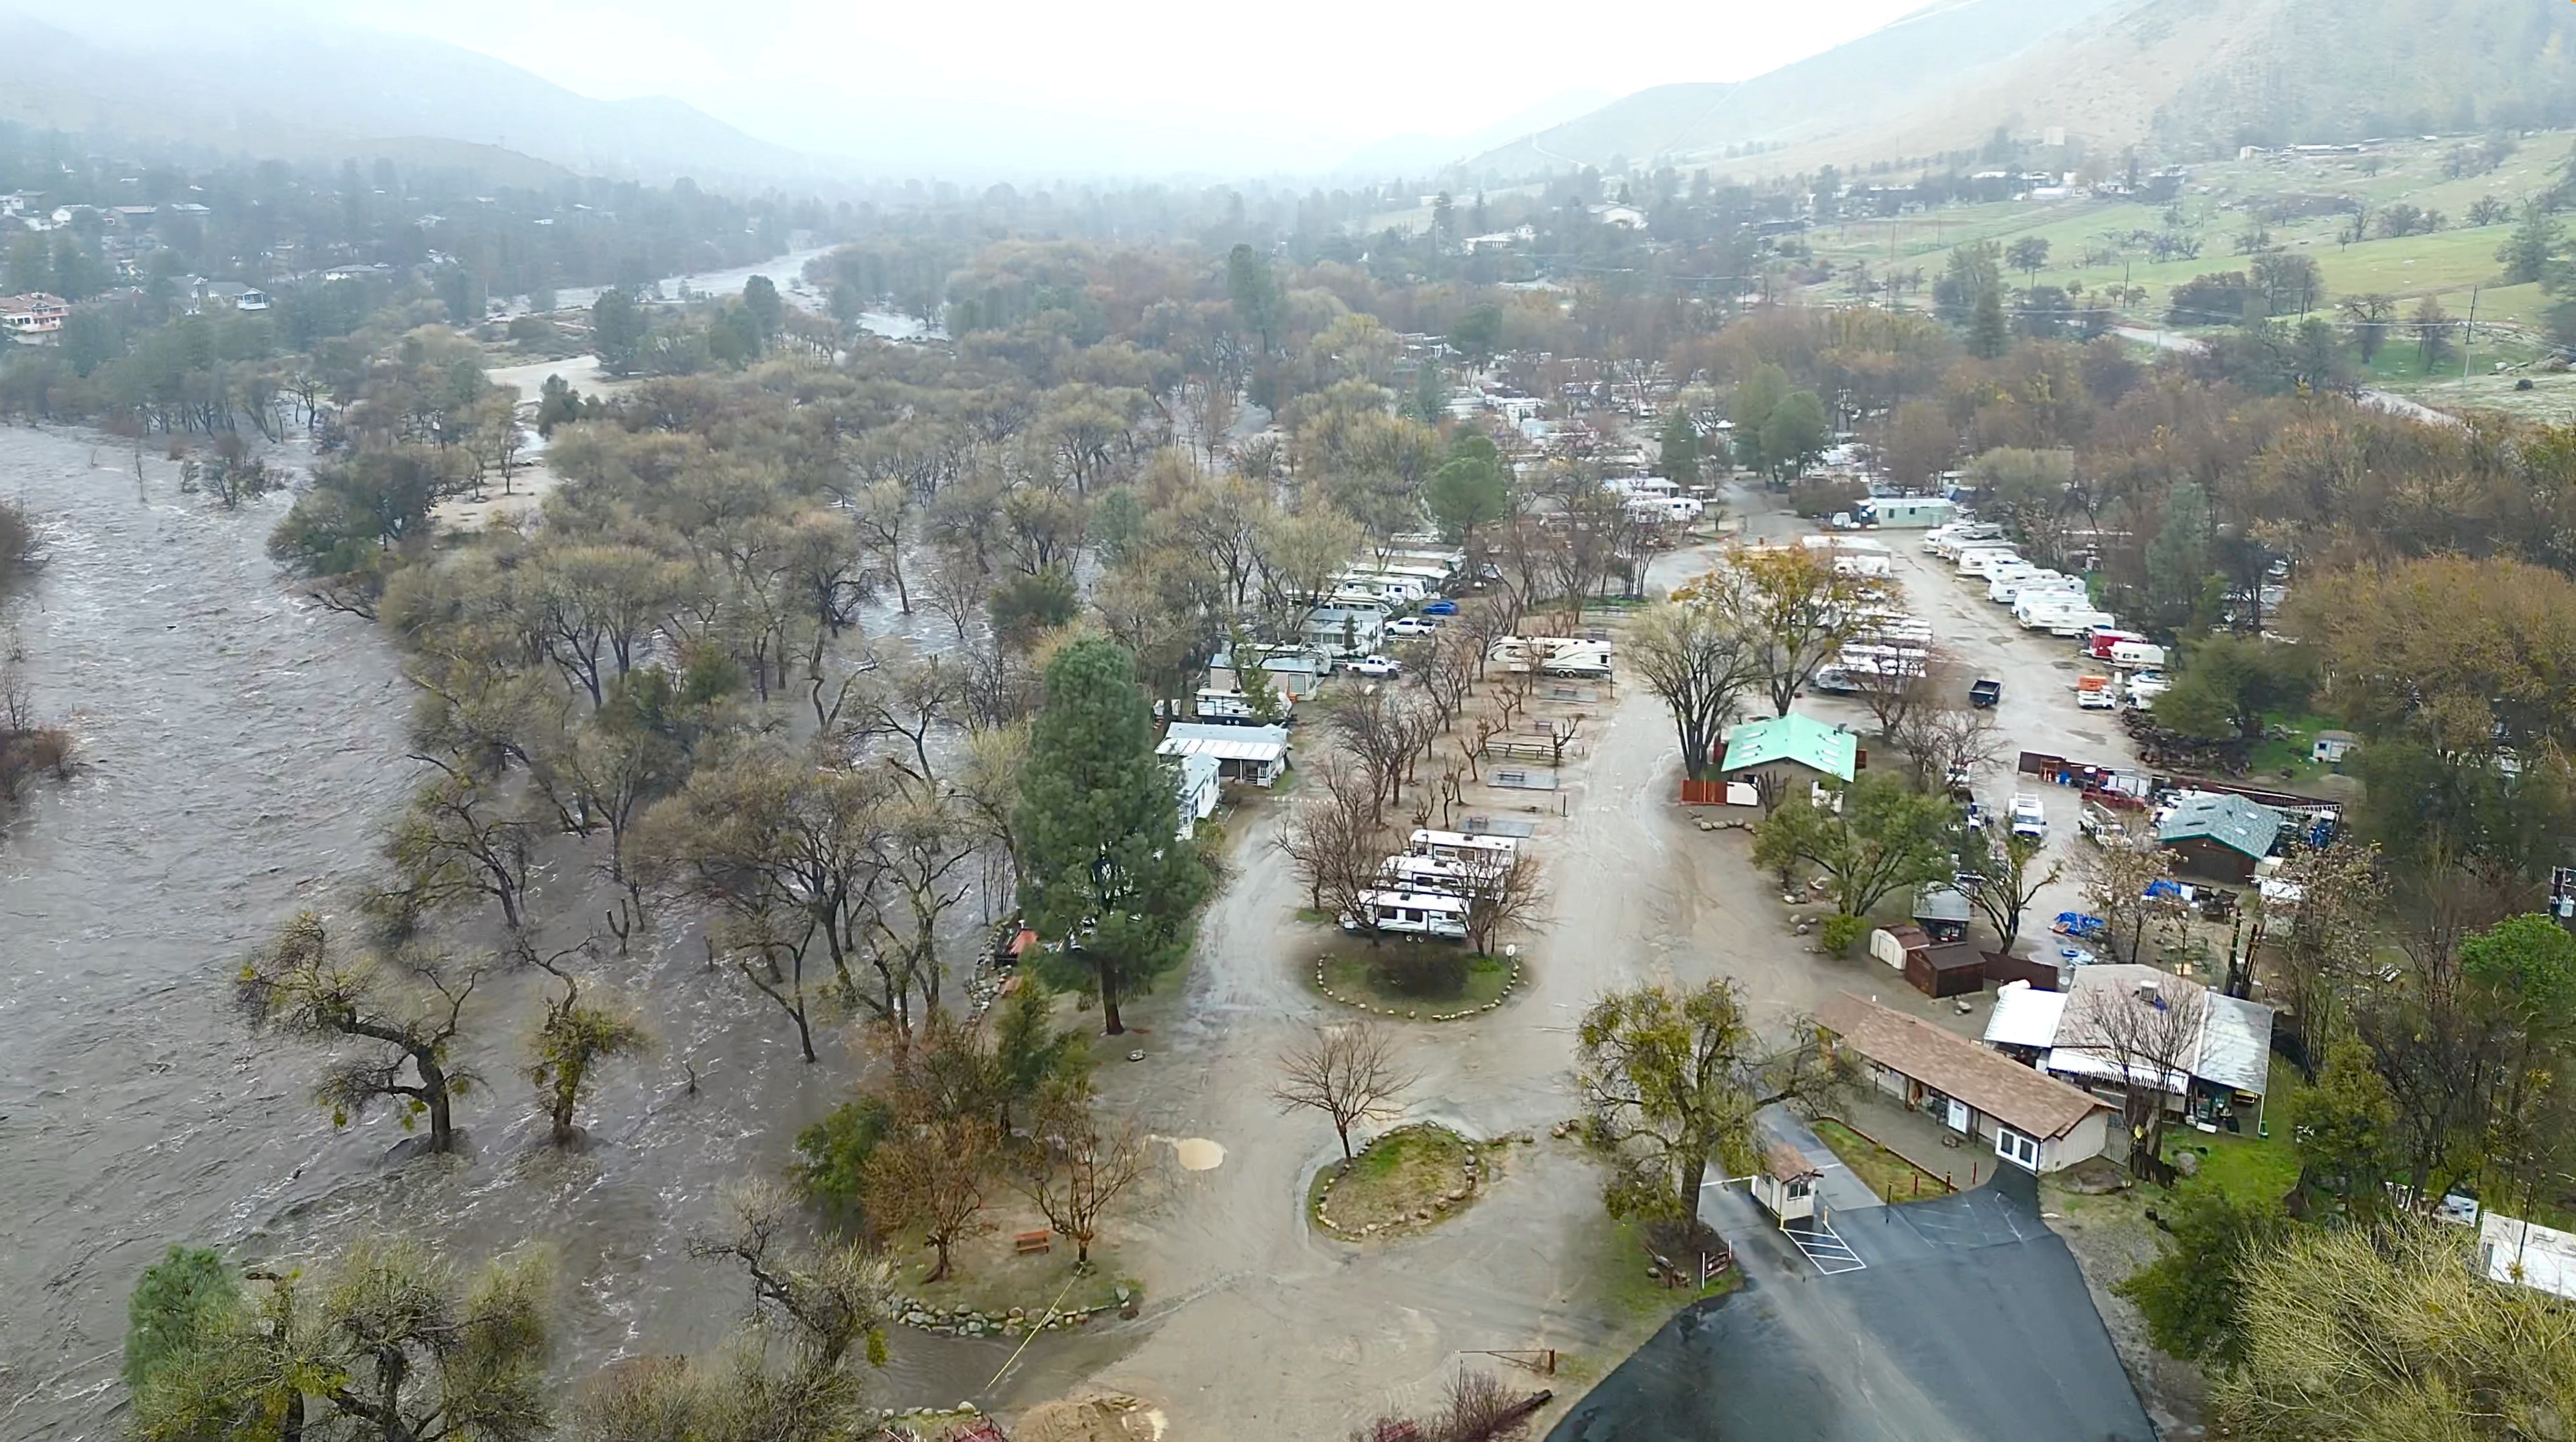 An aerial view of the overflowing Kern River in Kernville, California